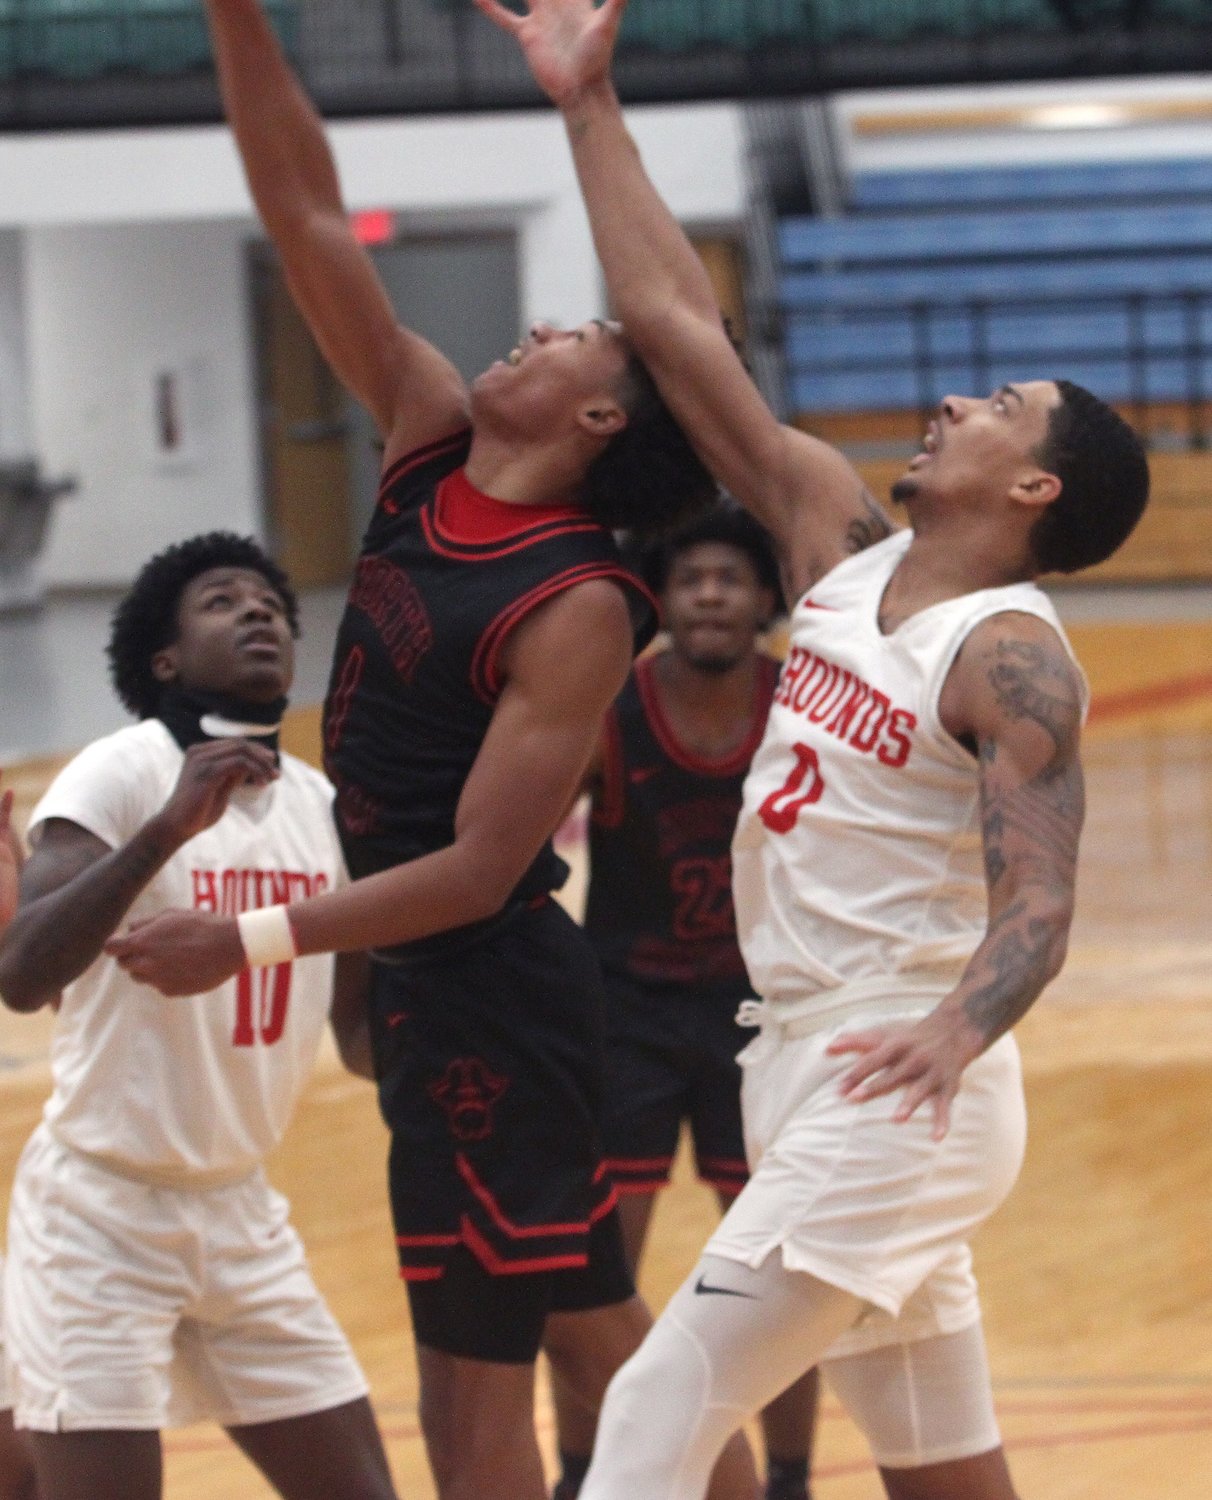 Aarron Burt of the Moberly Greyhounds (#0) reaches up against North Central Missouri College's  Kolten Griffin as the two contend for a rebound Tuesday while Burt's teammate Cortez Mosely looks for the same opportunity. MACC men held off North Central winning 110-109 at home in overtime.